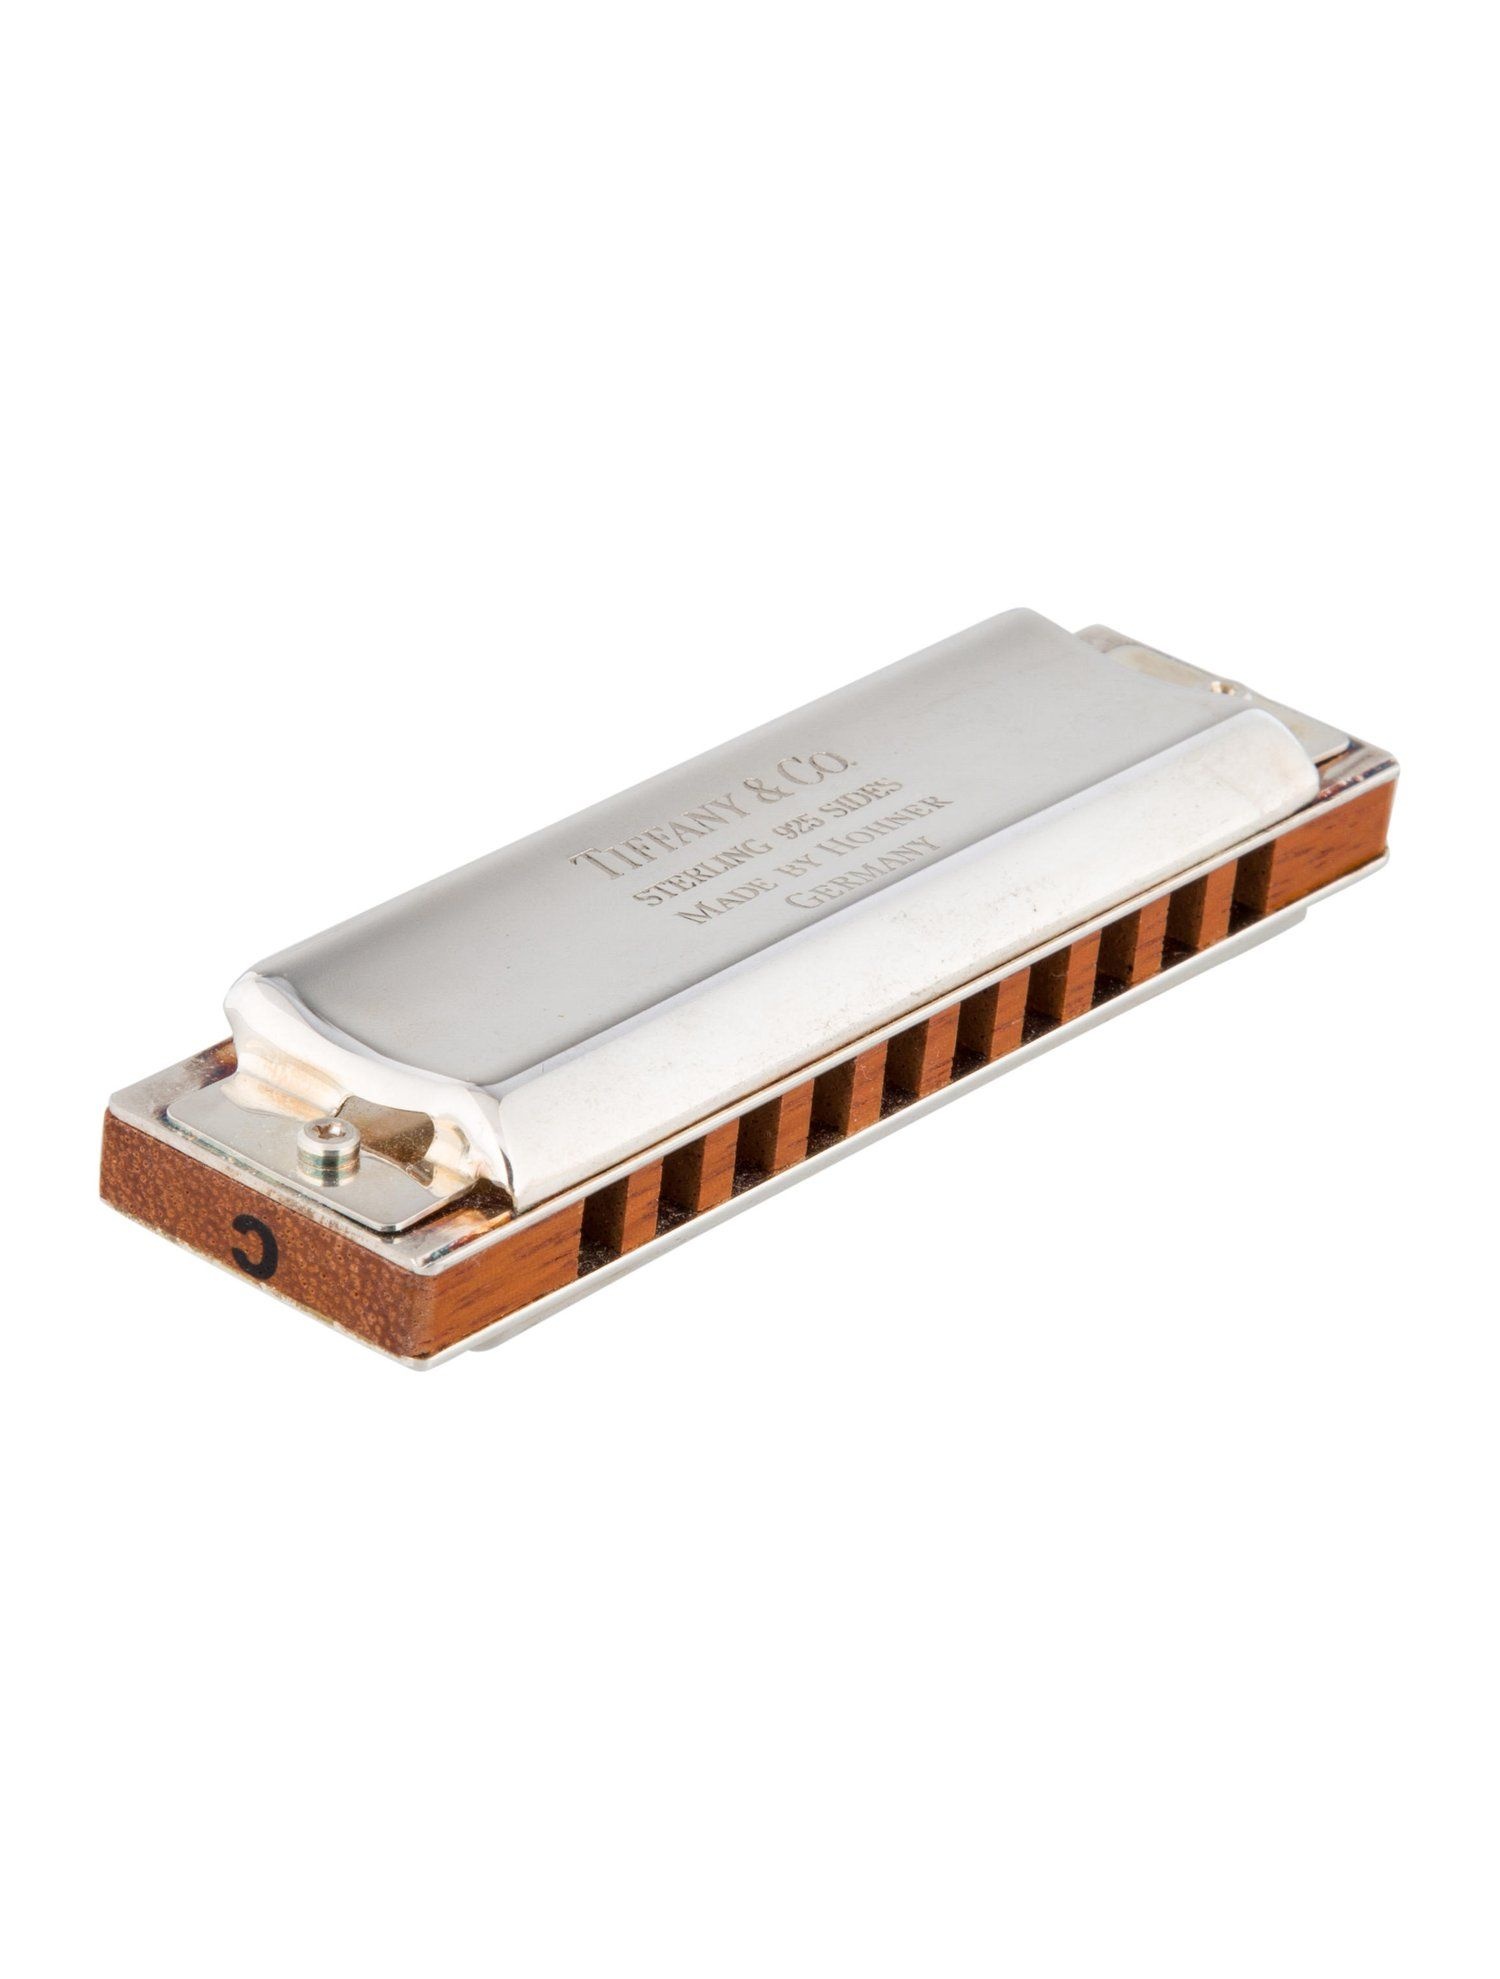 Harmonica: "Tyffany And Co" Model By Hohner, Germany, Sterling 925 Sides, Textolite Corpus, Polished Engraved Covering Plates. 1500x1980 HD Wallpaper.